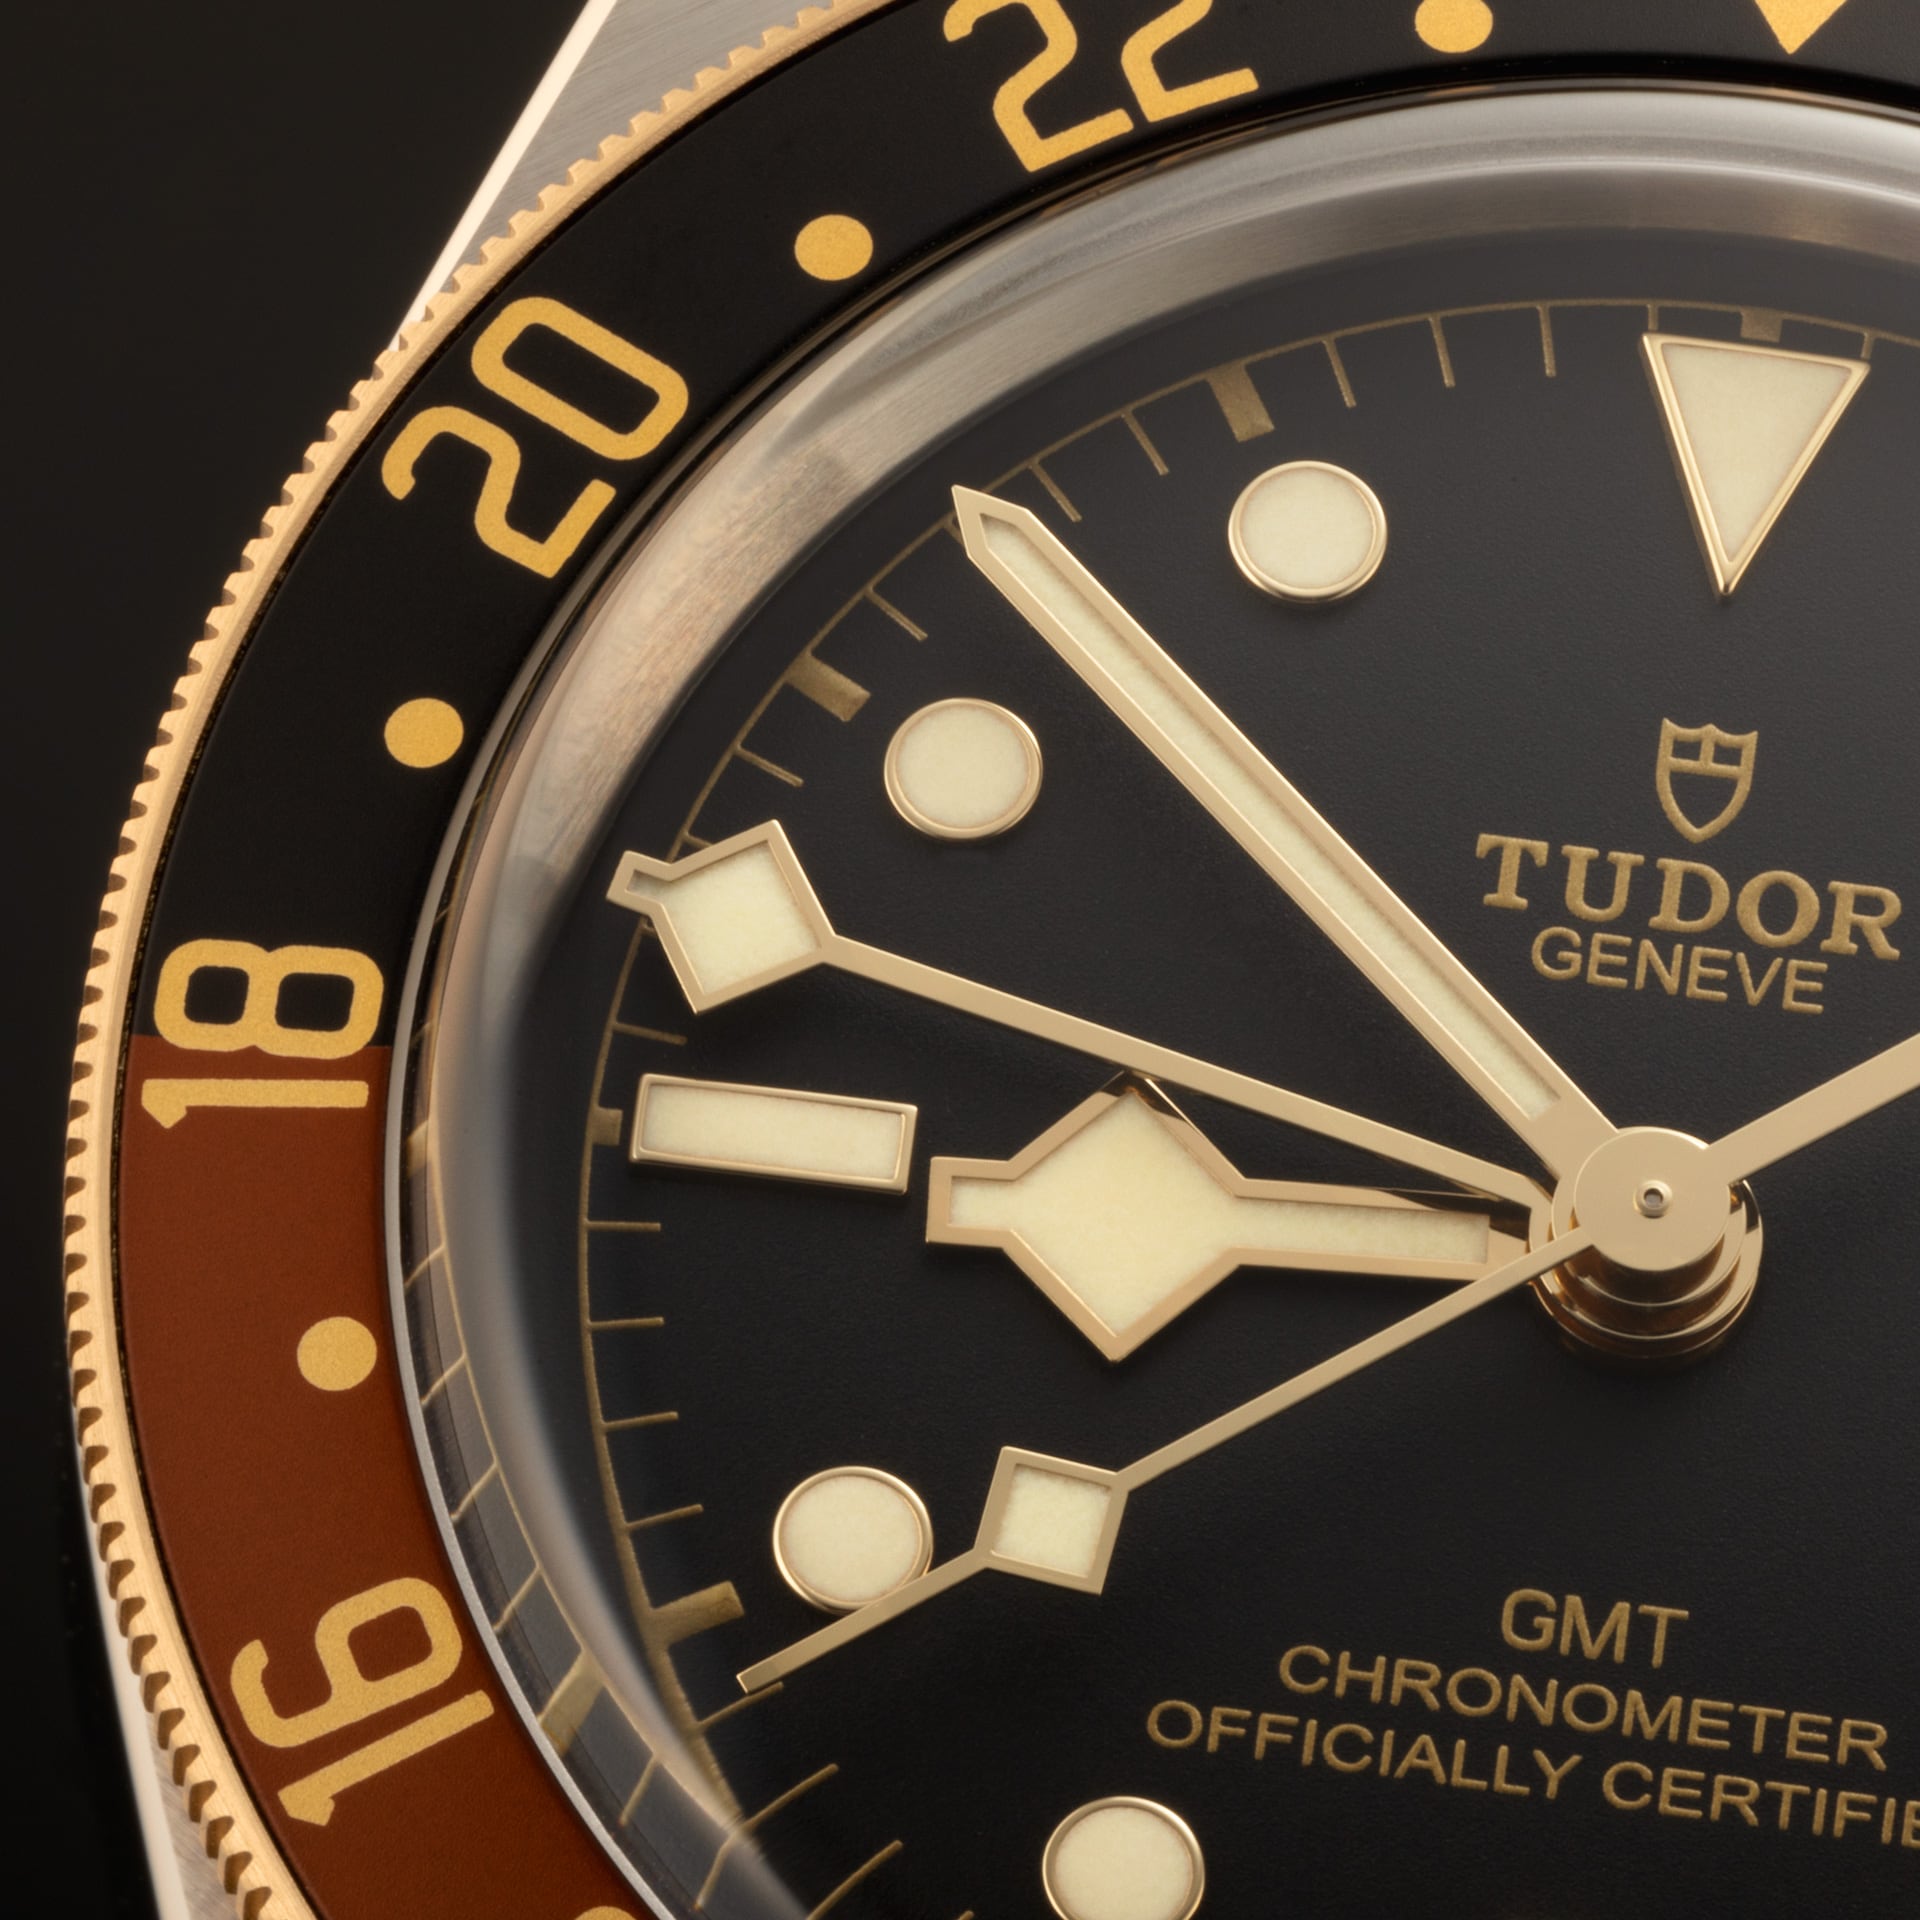 Tudor Black Bay GMT S&G, Stainless Steel and 18k Yellow Gold, 41mm, Ref# M79833MN-0003, Dial